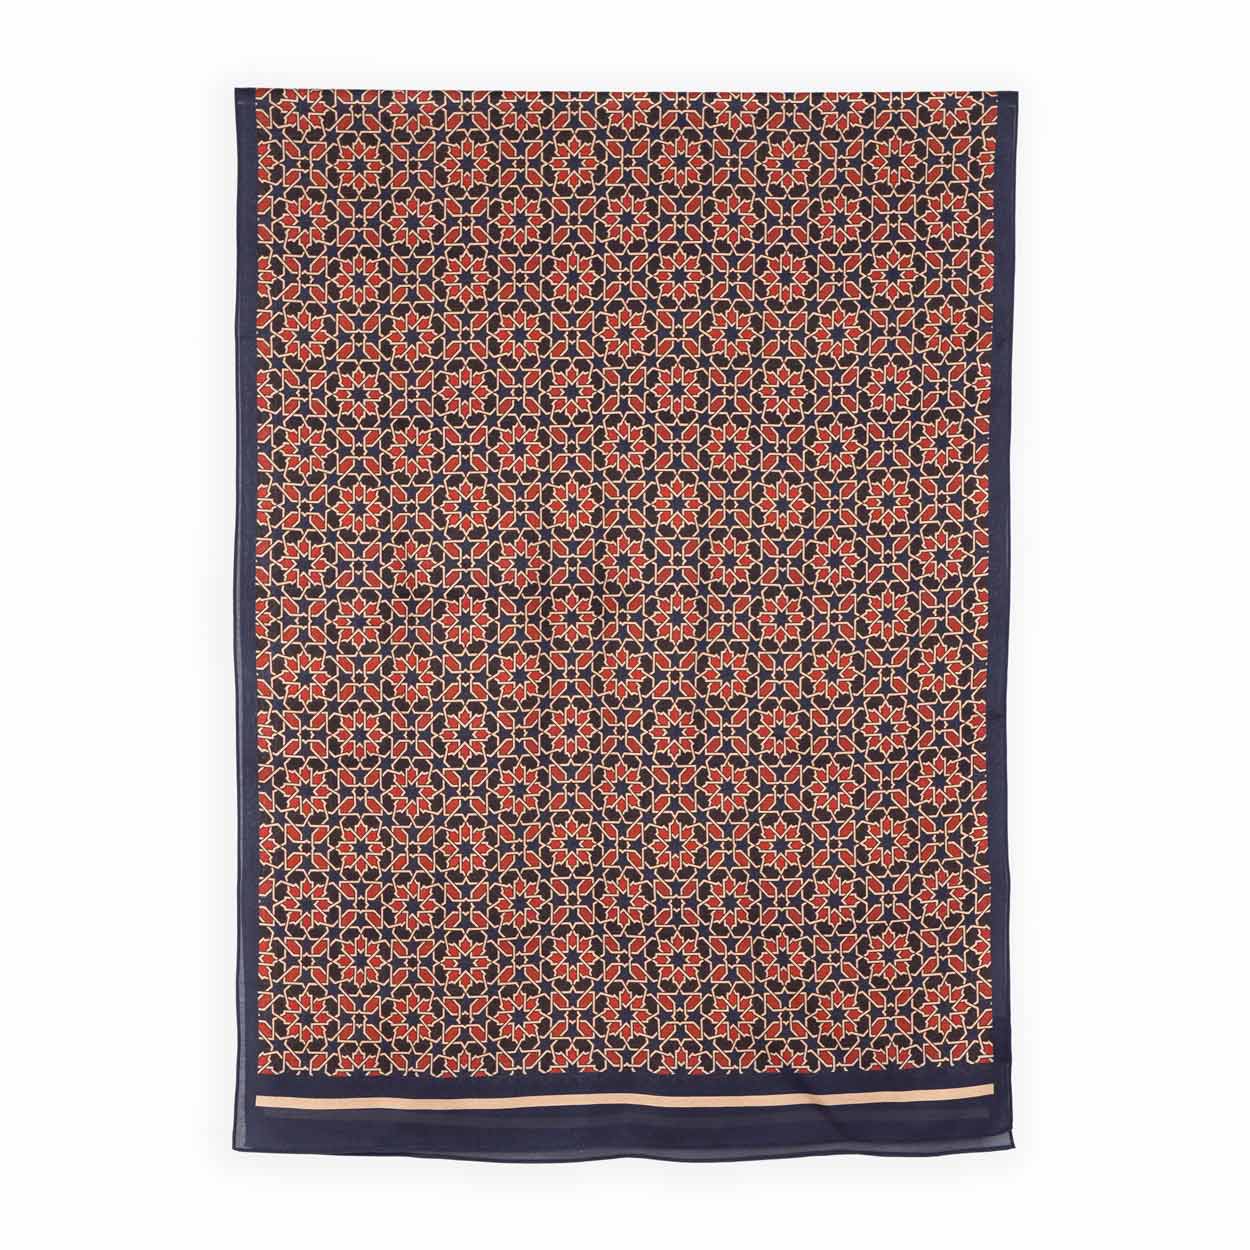 Large scarf for women with red and blue print featuring Alhambra Palace tiles